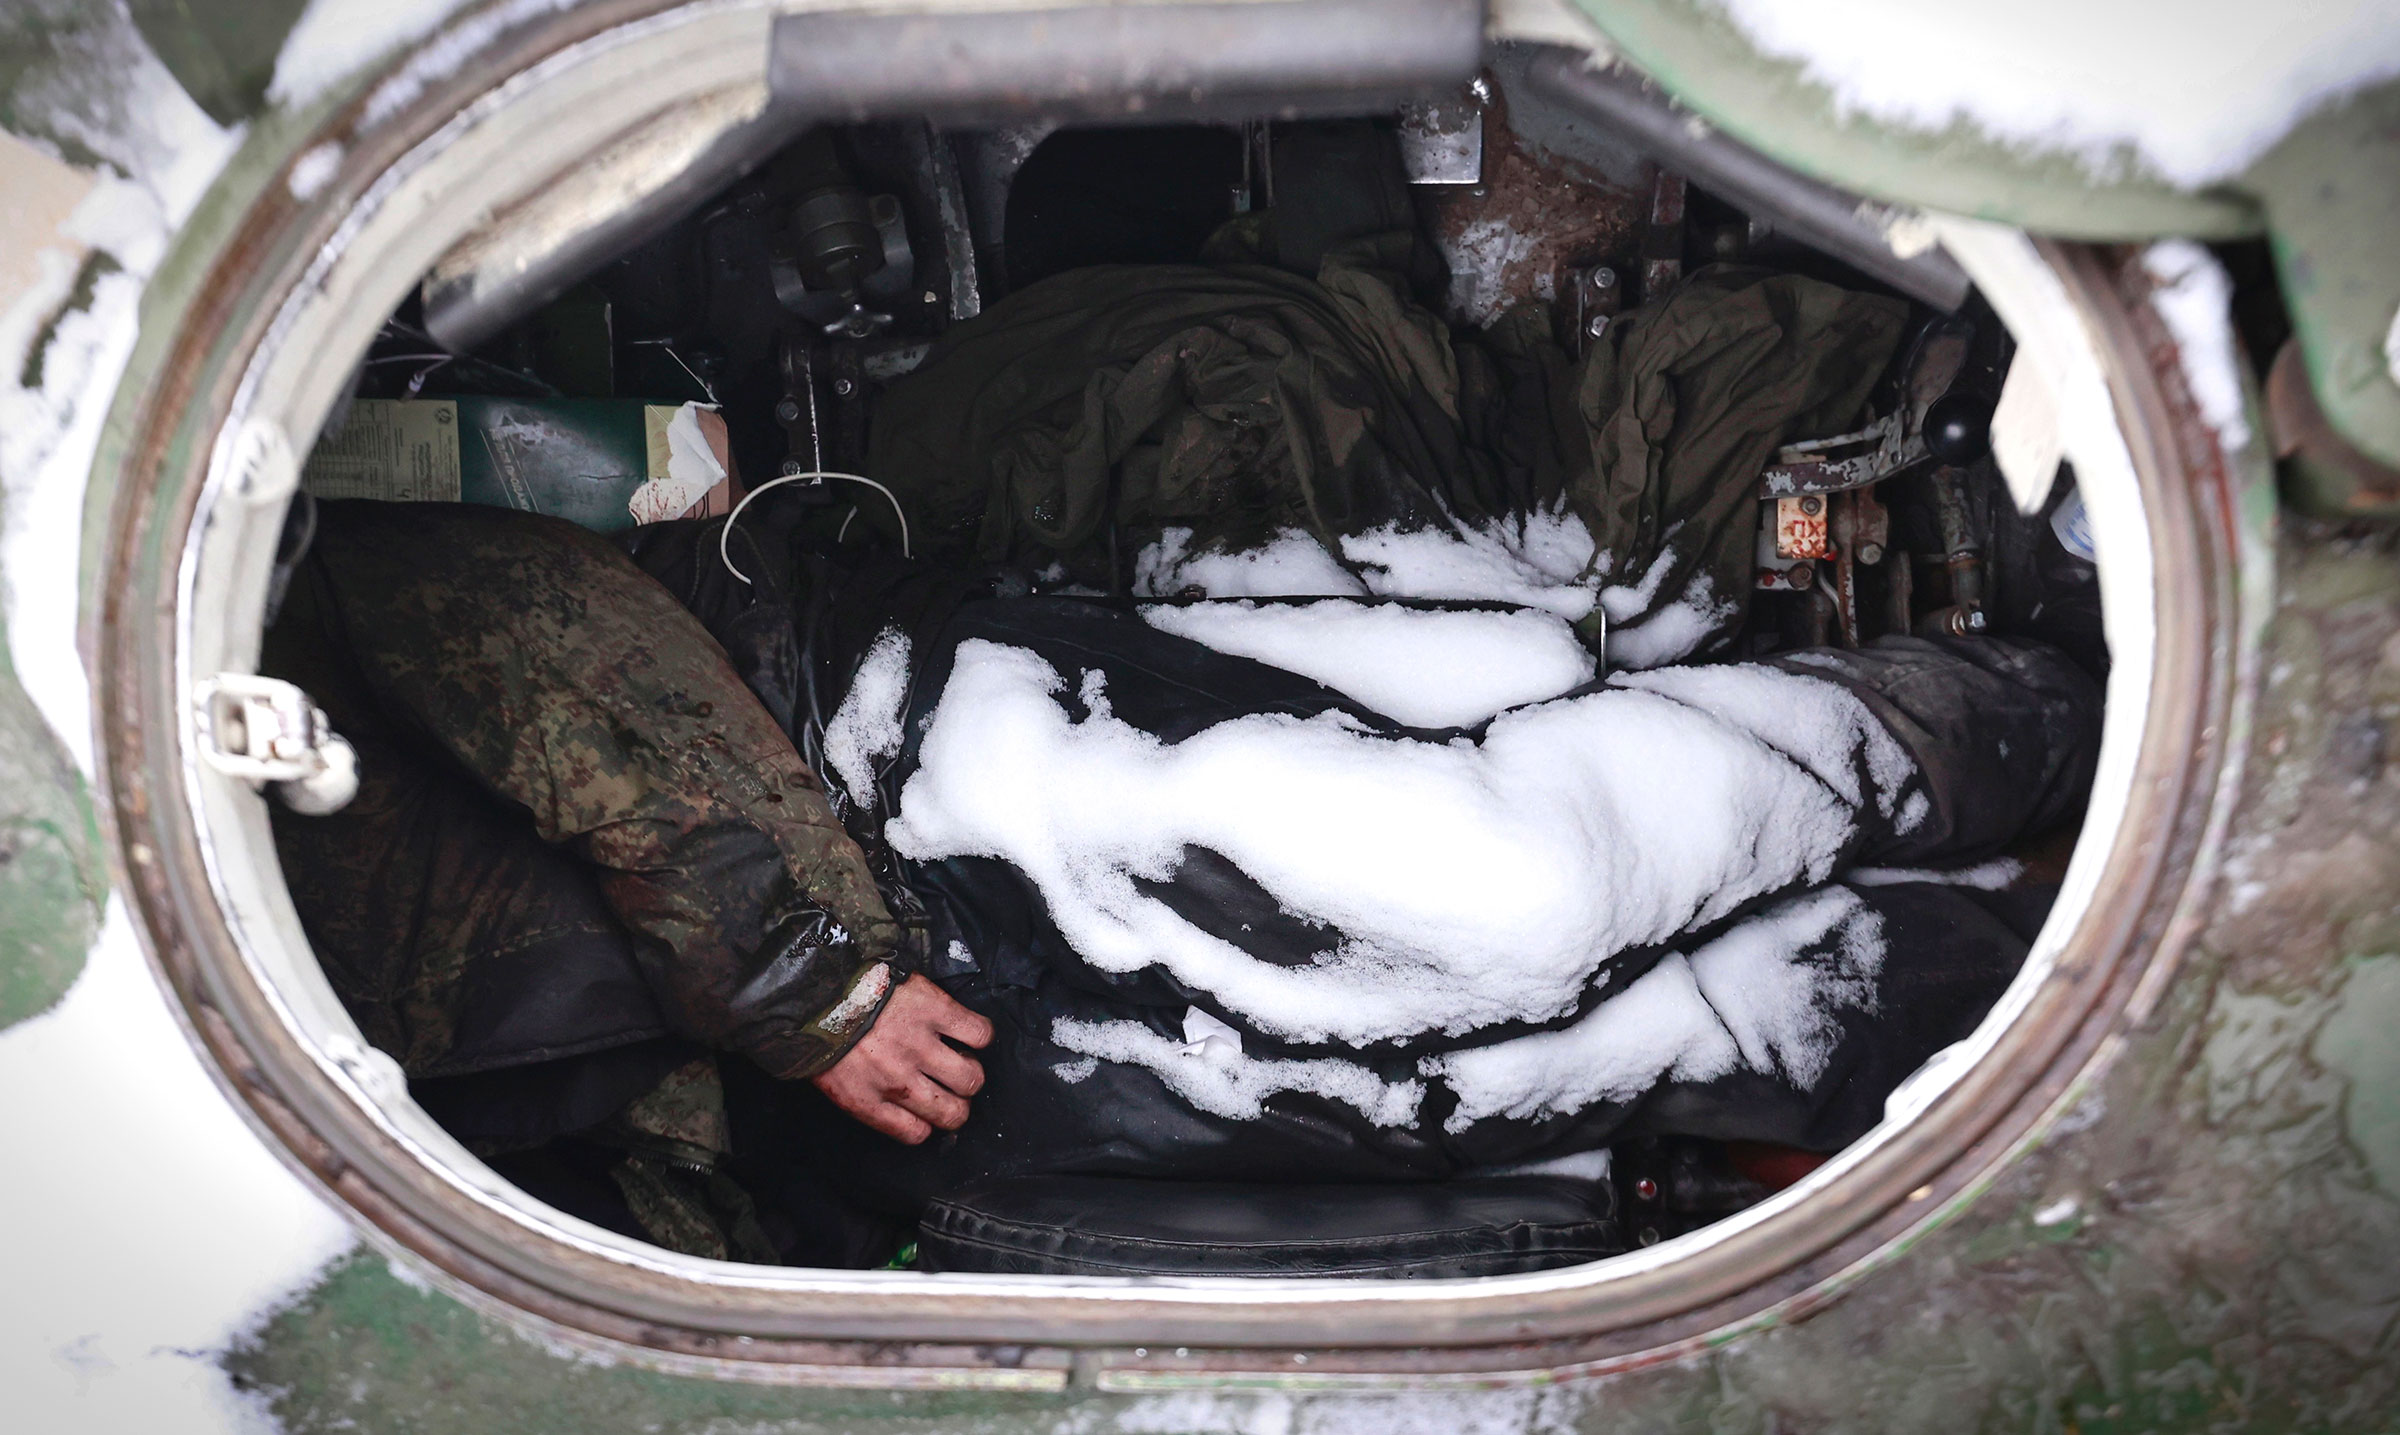 The dead bodies of soldiers are seen in a military vehicle on a road in the town of Bucha, close to the capital Kyiv, on March 1. (Serhii Nuzhnenko—AP)